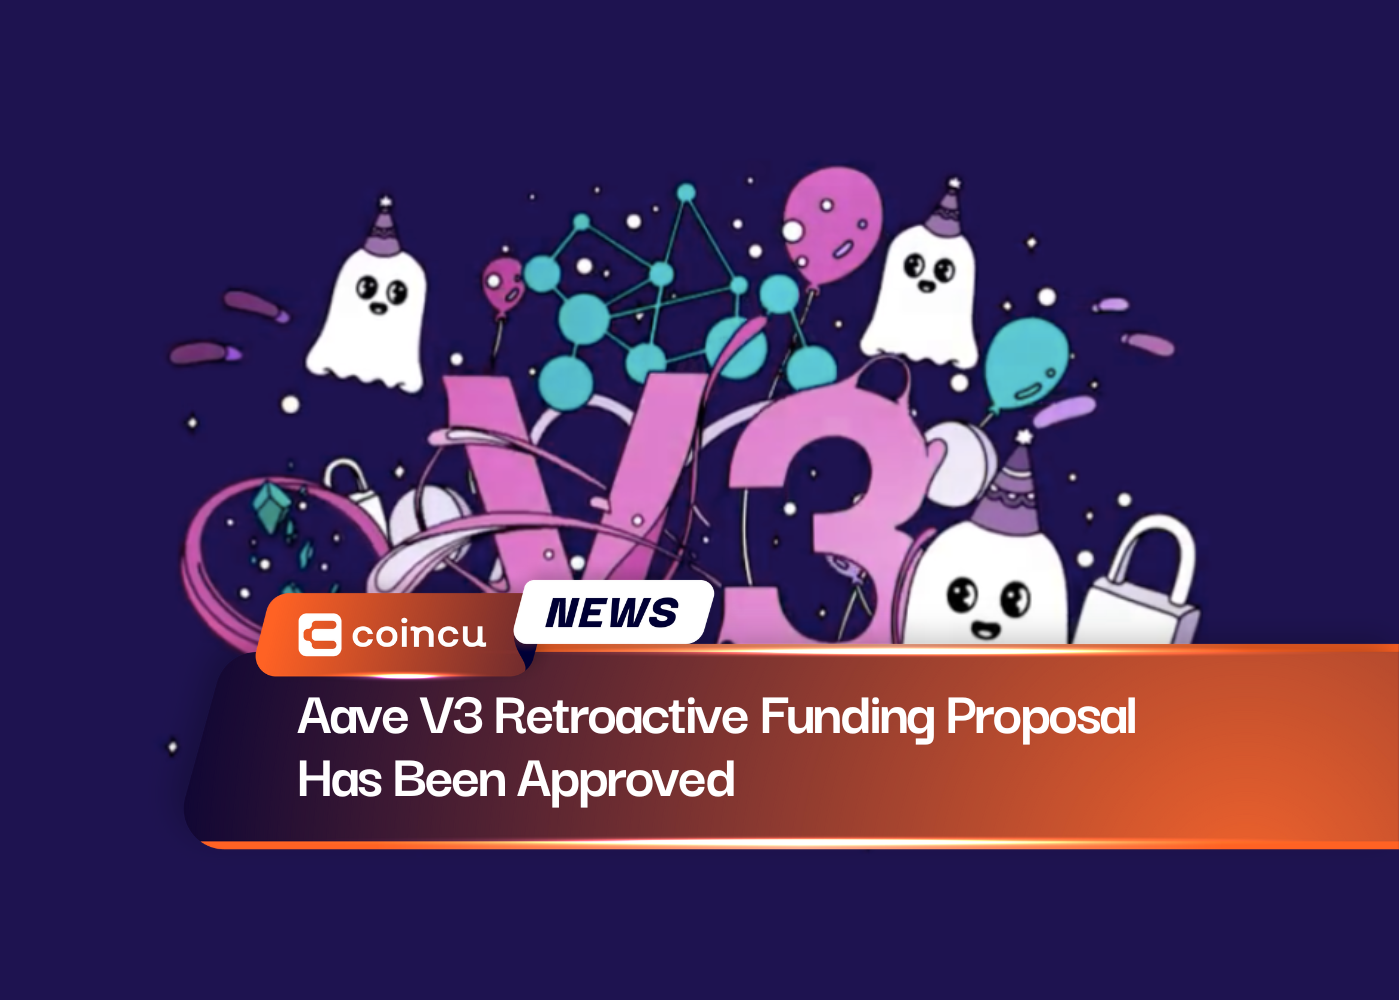 Aave V3 Retroactive Funding Proposal Has Been Approved